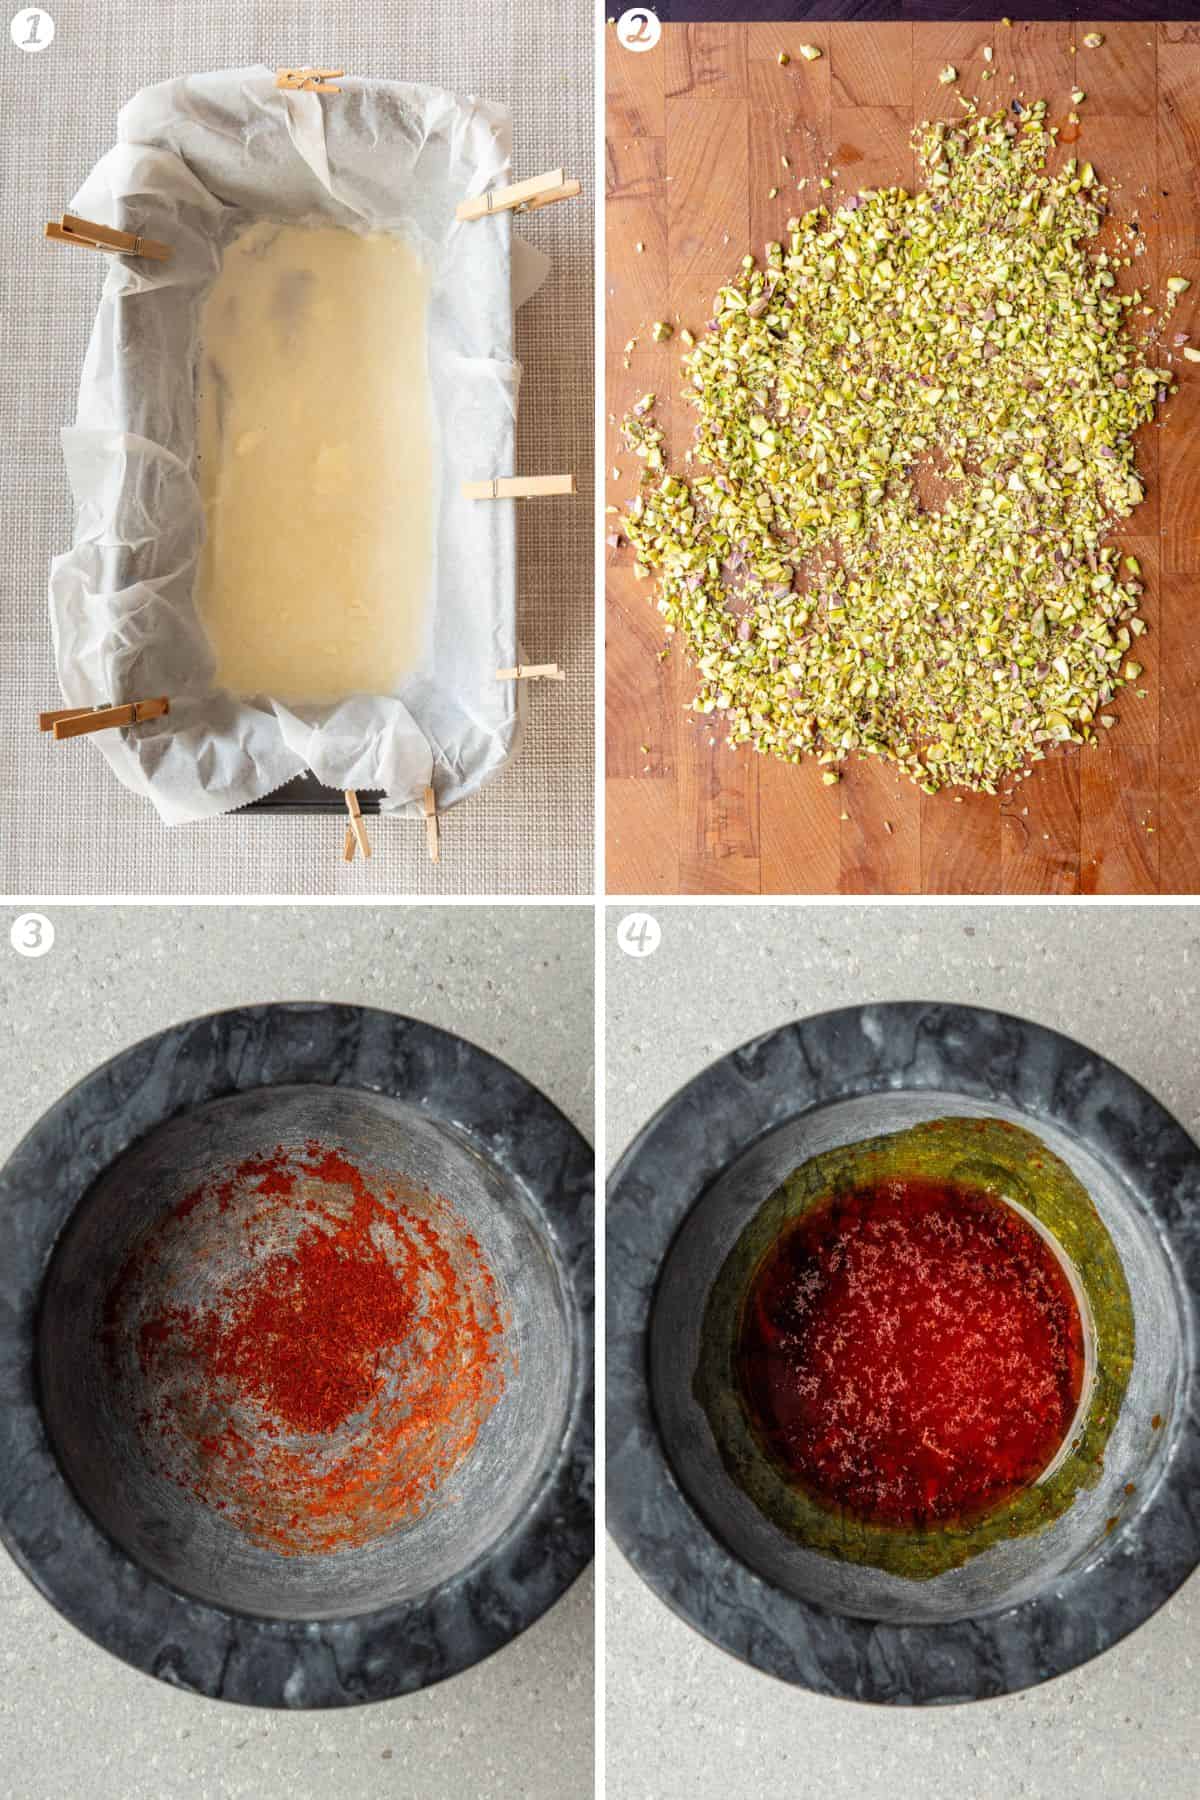 Steps on how to prepare ingredients before making the ice cream